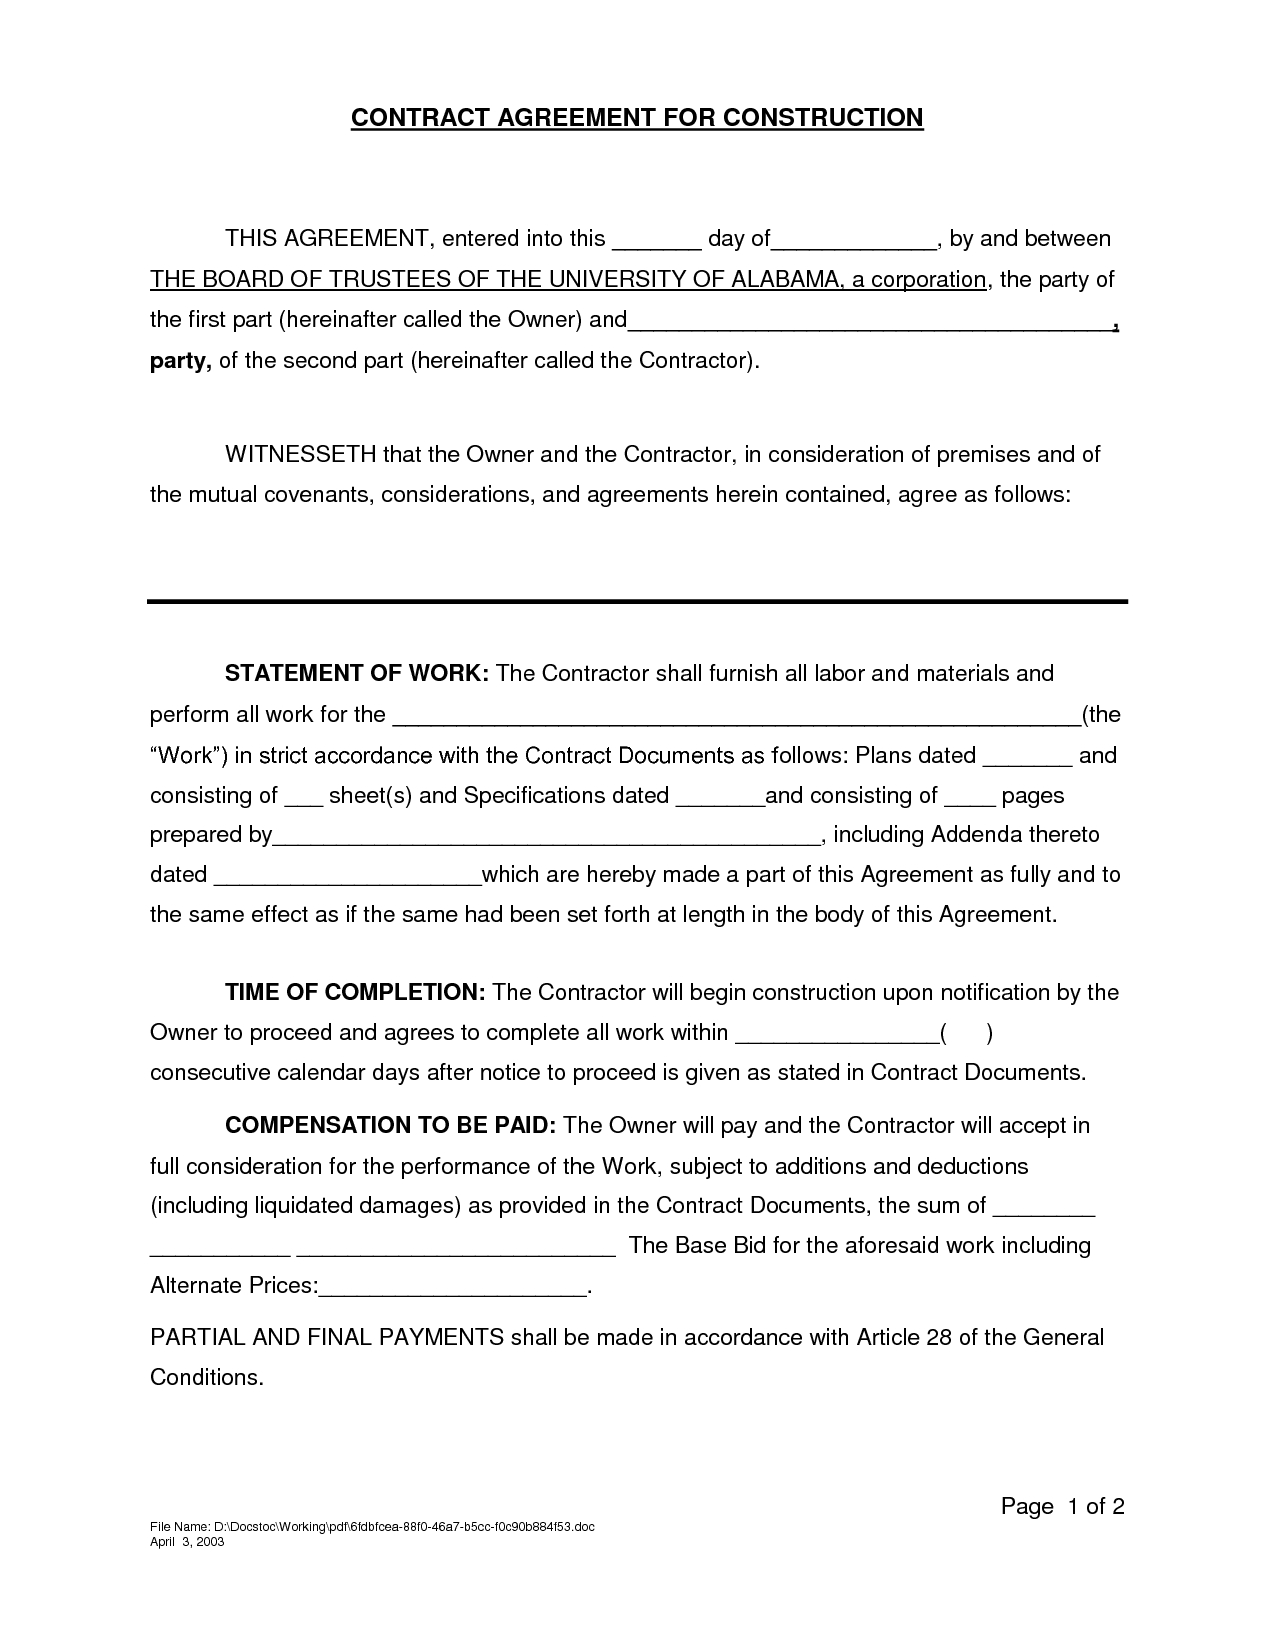 Sample Contract Agreement - Free Printable Documents for Modeling Contract Agreement